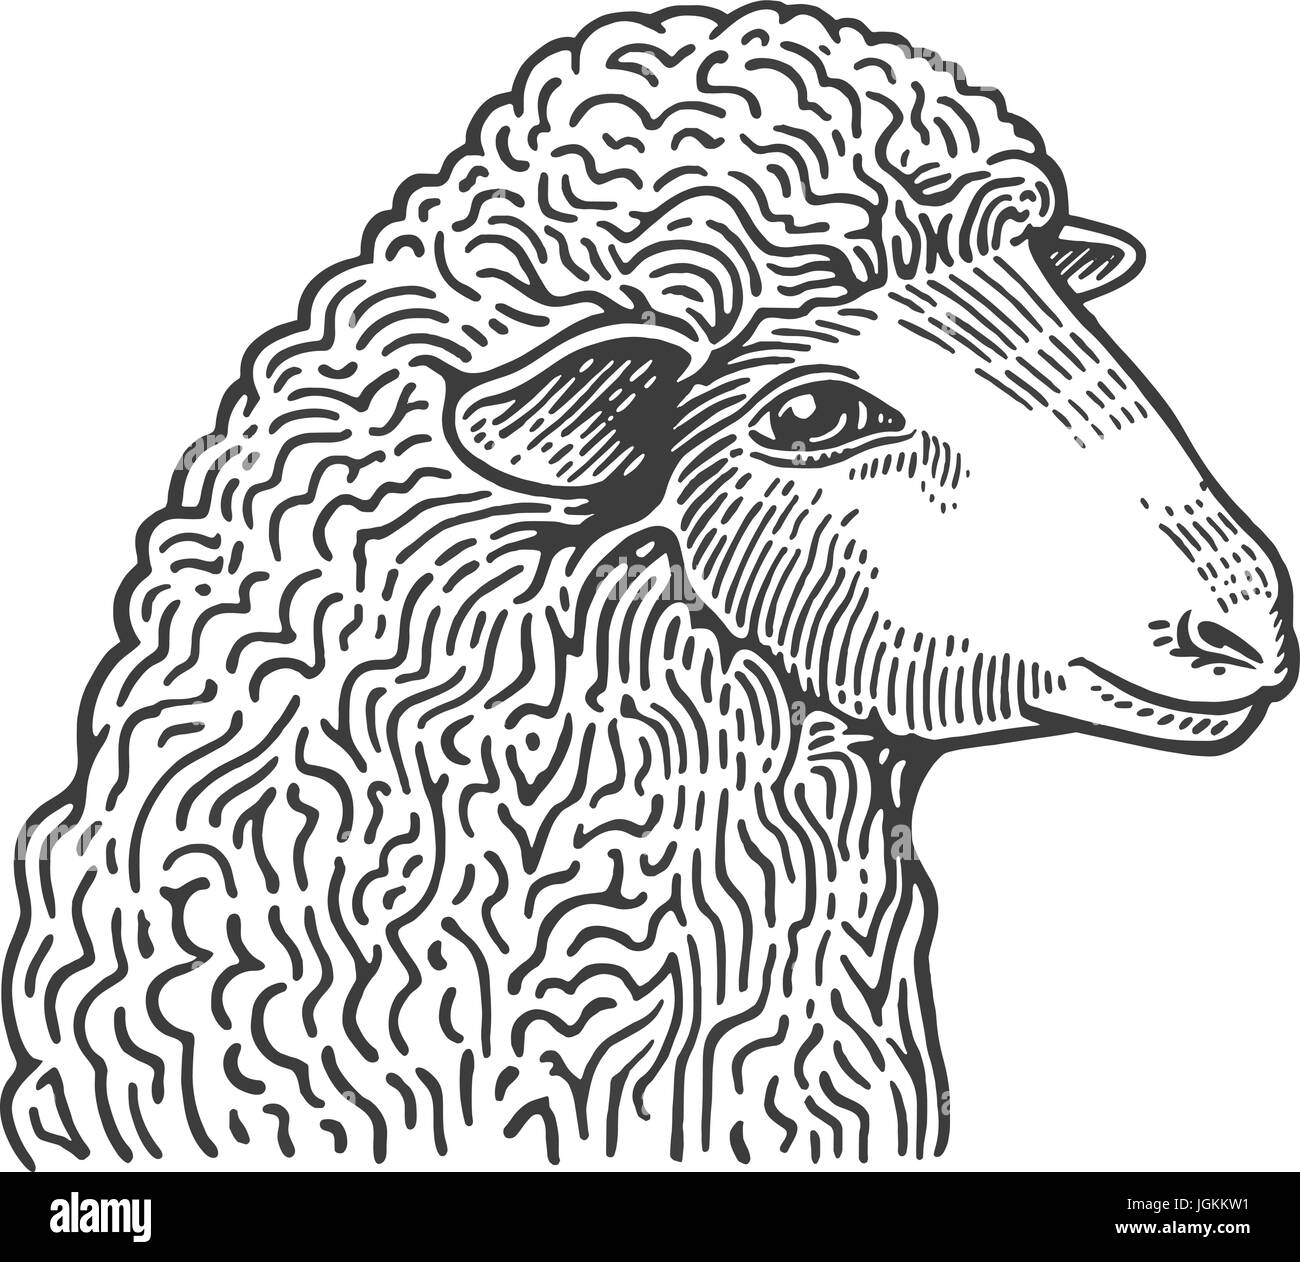 Head of sheep hand drawn in style of medieval engraving. Domestic farm animal isolated on white background. Vector illustration in monochrome colors for restaurant menu, butcher shop, website, logo. Stock Vector